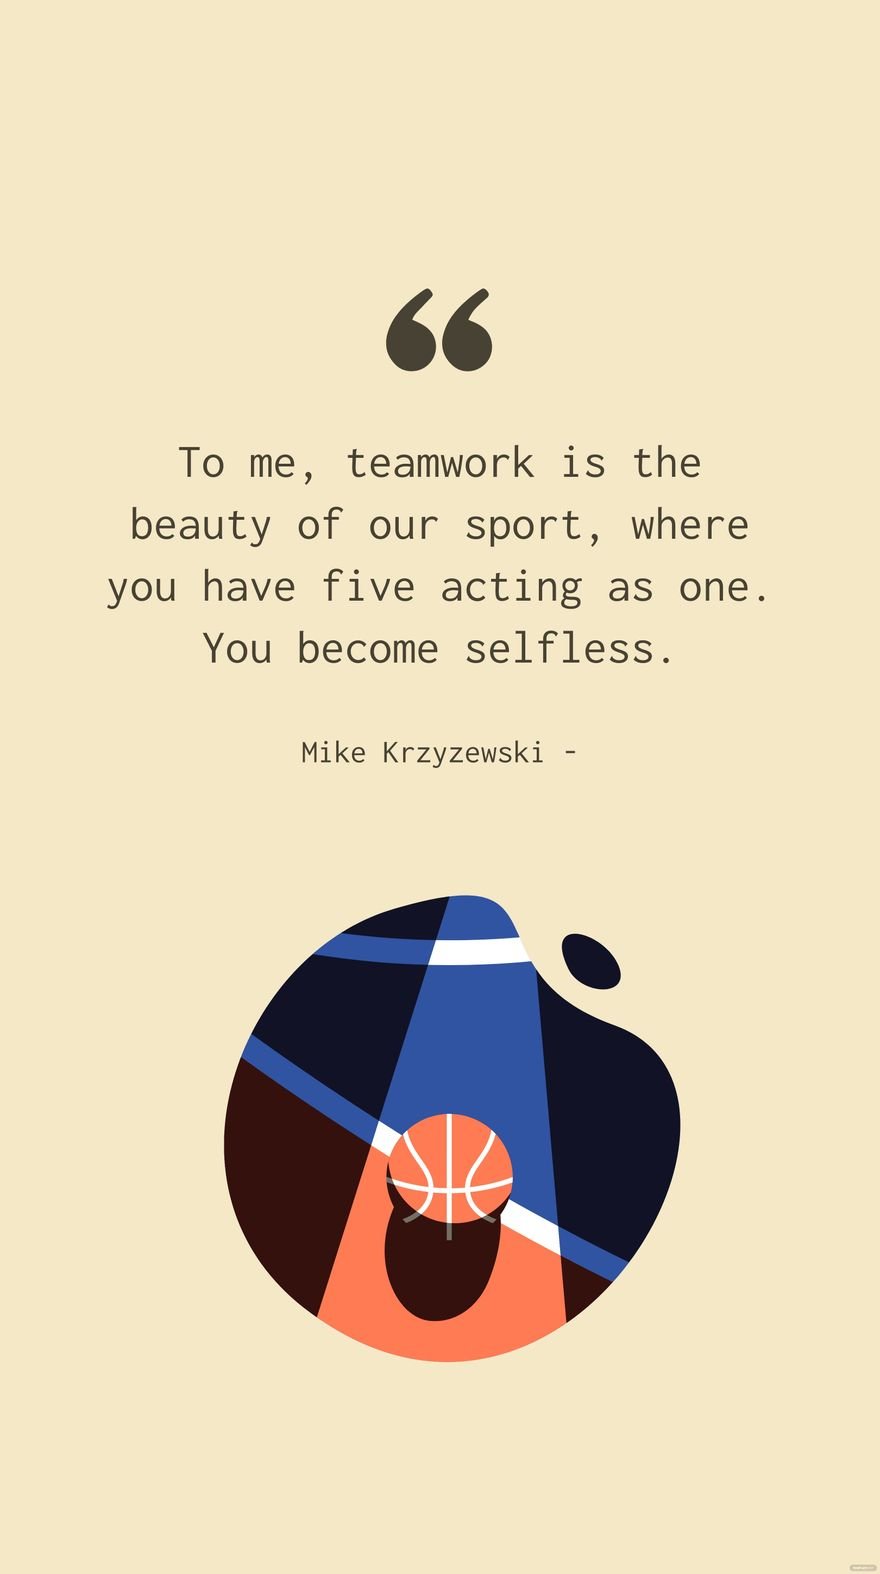 Mike Krzyzewski - To me, teamwork is the beauty of our sport, where you have five acting as one. You become selfless. in JPG